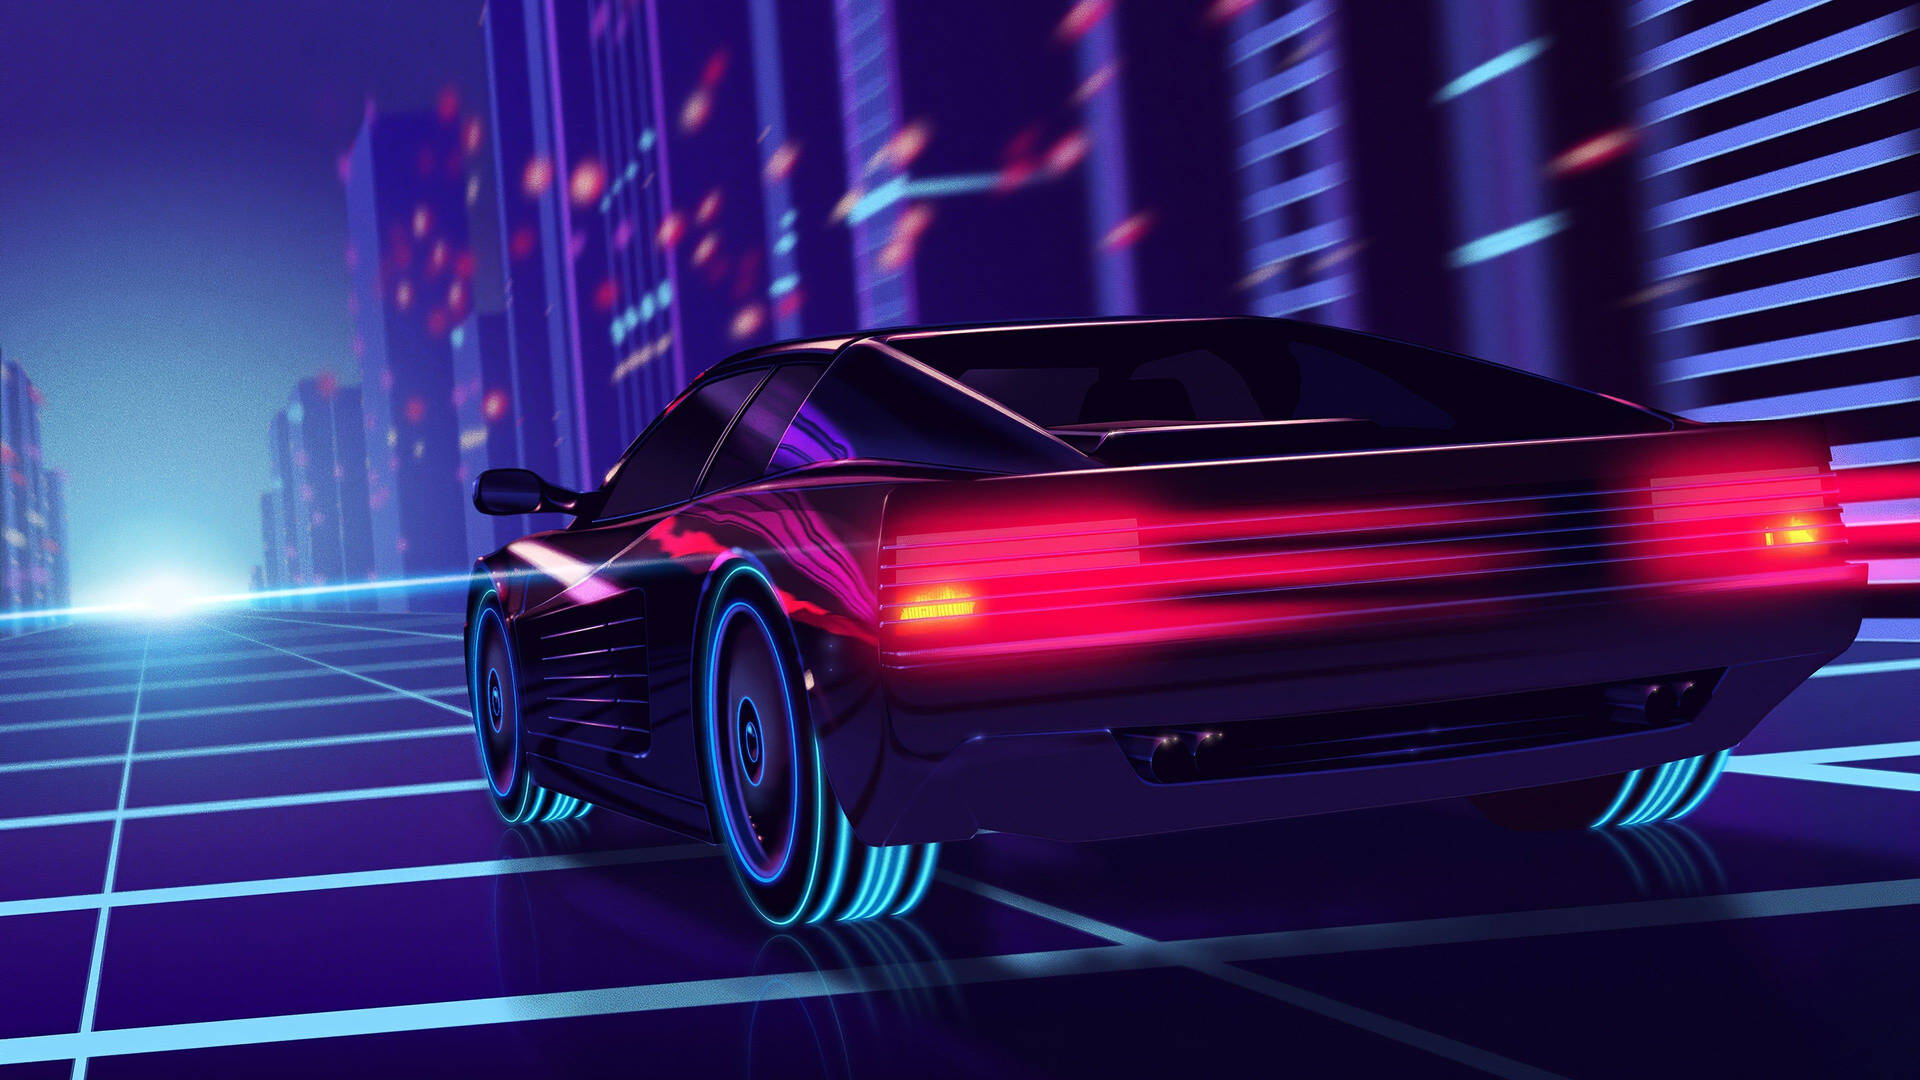 4k Neon Car At Neon City Background